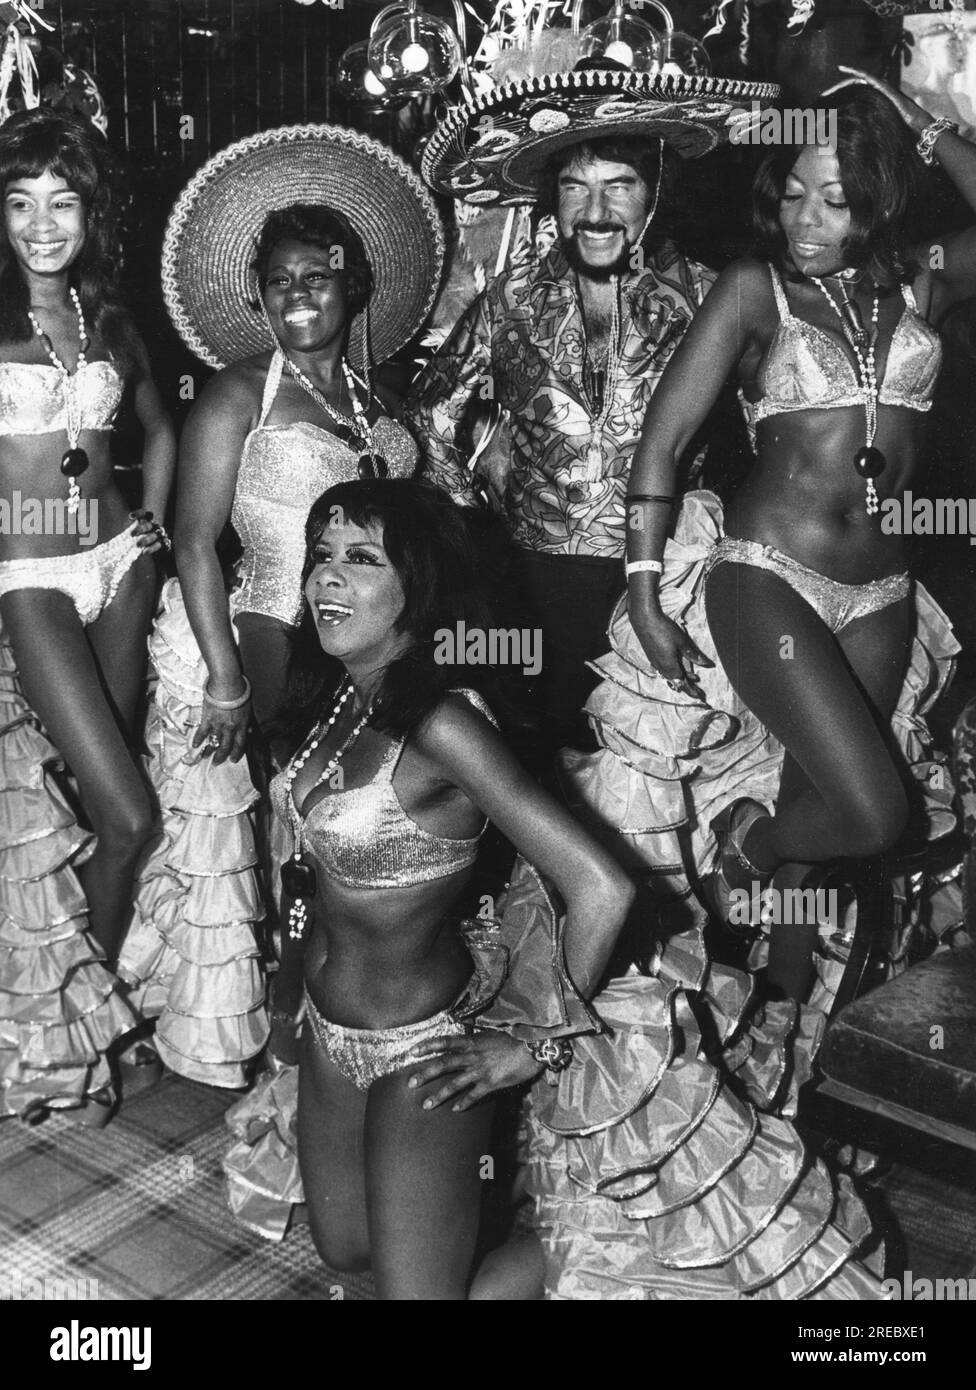 Valdor, Frank, 27.5.1937 - 5.8.2013, German arranger and actor, with Brazilian dancers, 1973, ADDITIONAL-RIGHTS-CLEARANCE-INFO-NOT-AVAILABLE Stock Photo